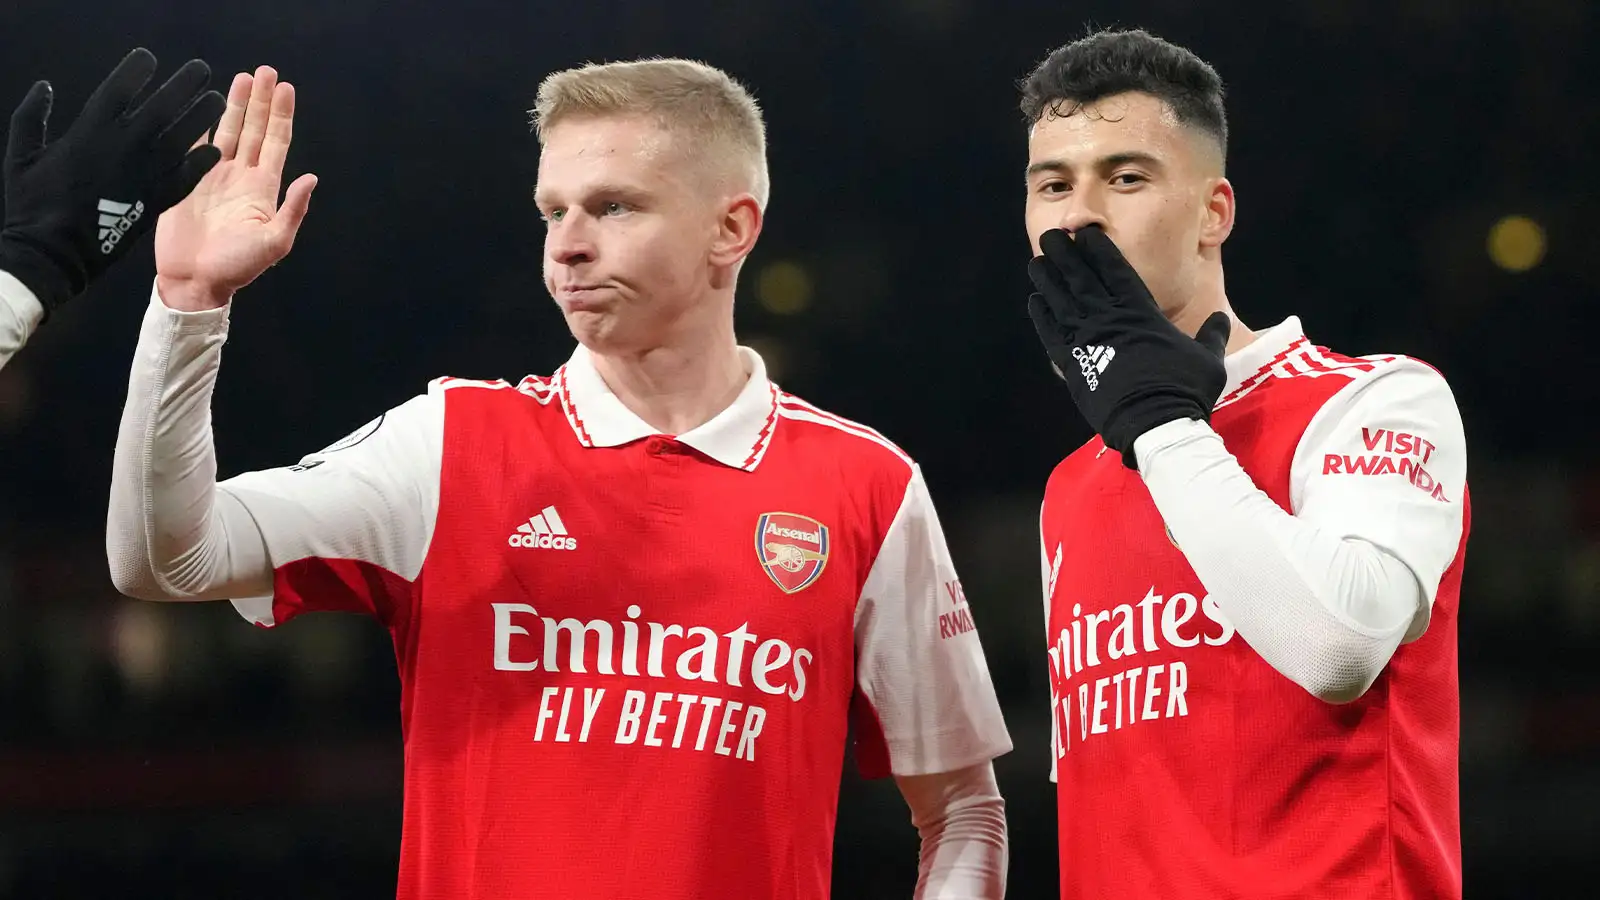 Arsenal's Gabriel Martinelli, right, celebrates with Oleksandr Zinchenko after scoring his side's fourth goal during the English Premier League soccer match between Arsenal and Everton at the Emirates stadium in London, Wednesday, March 1, 2023